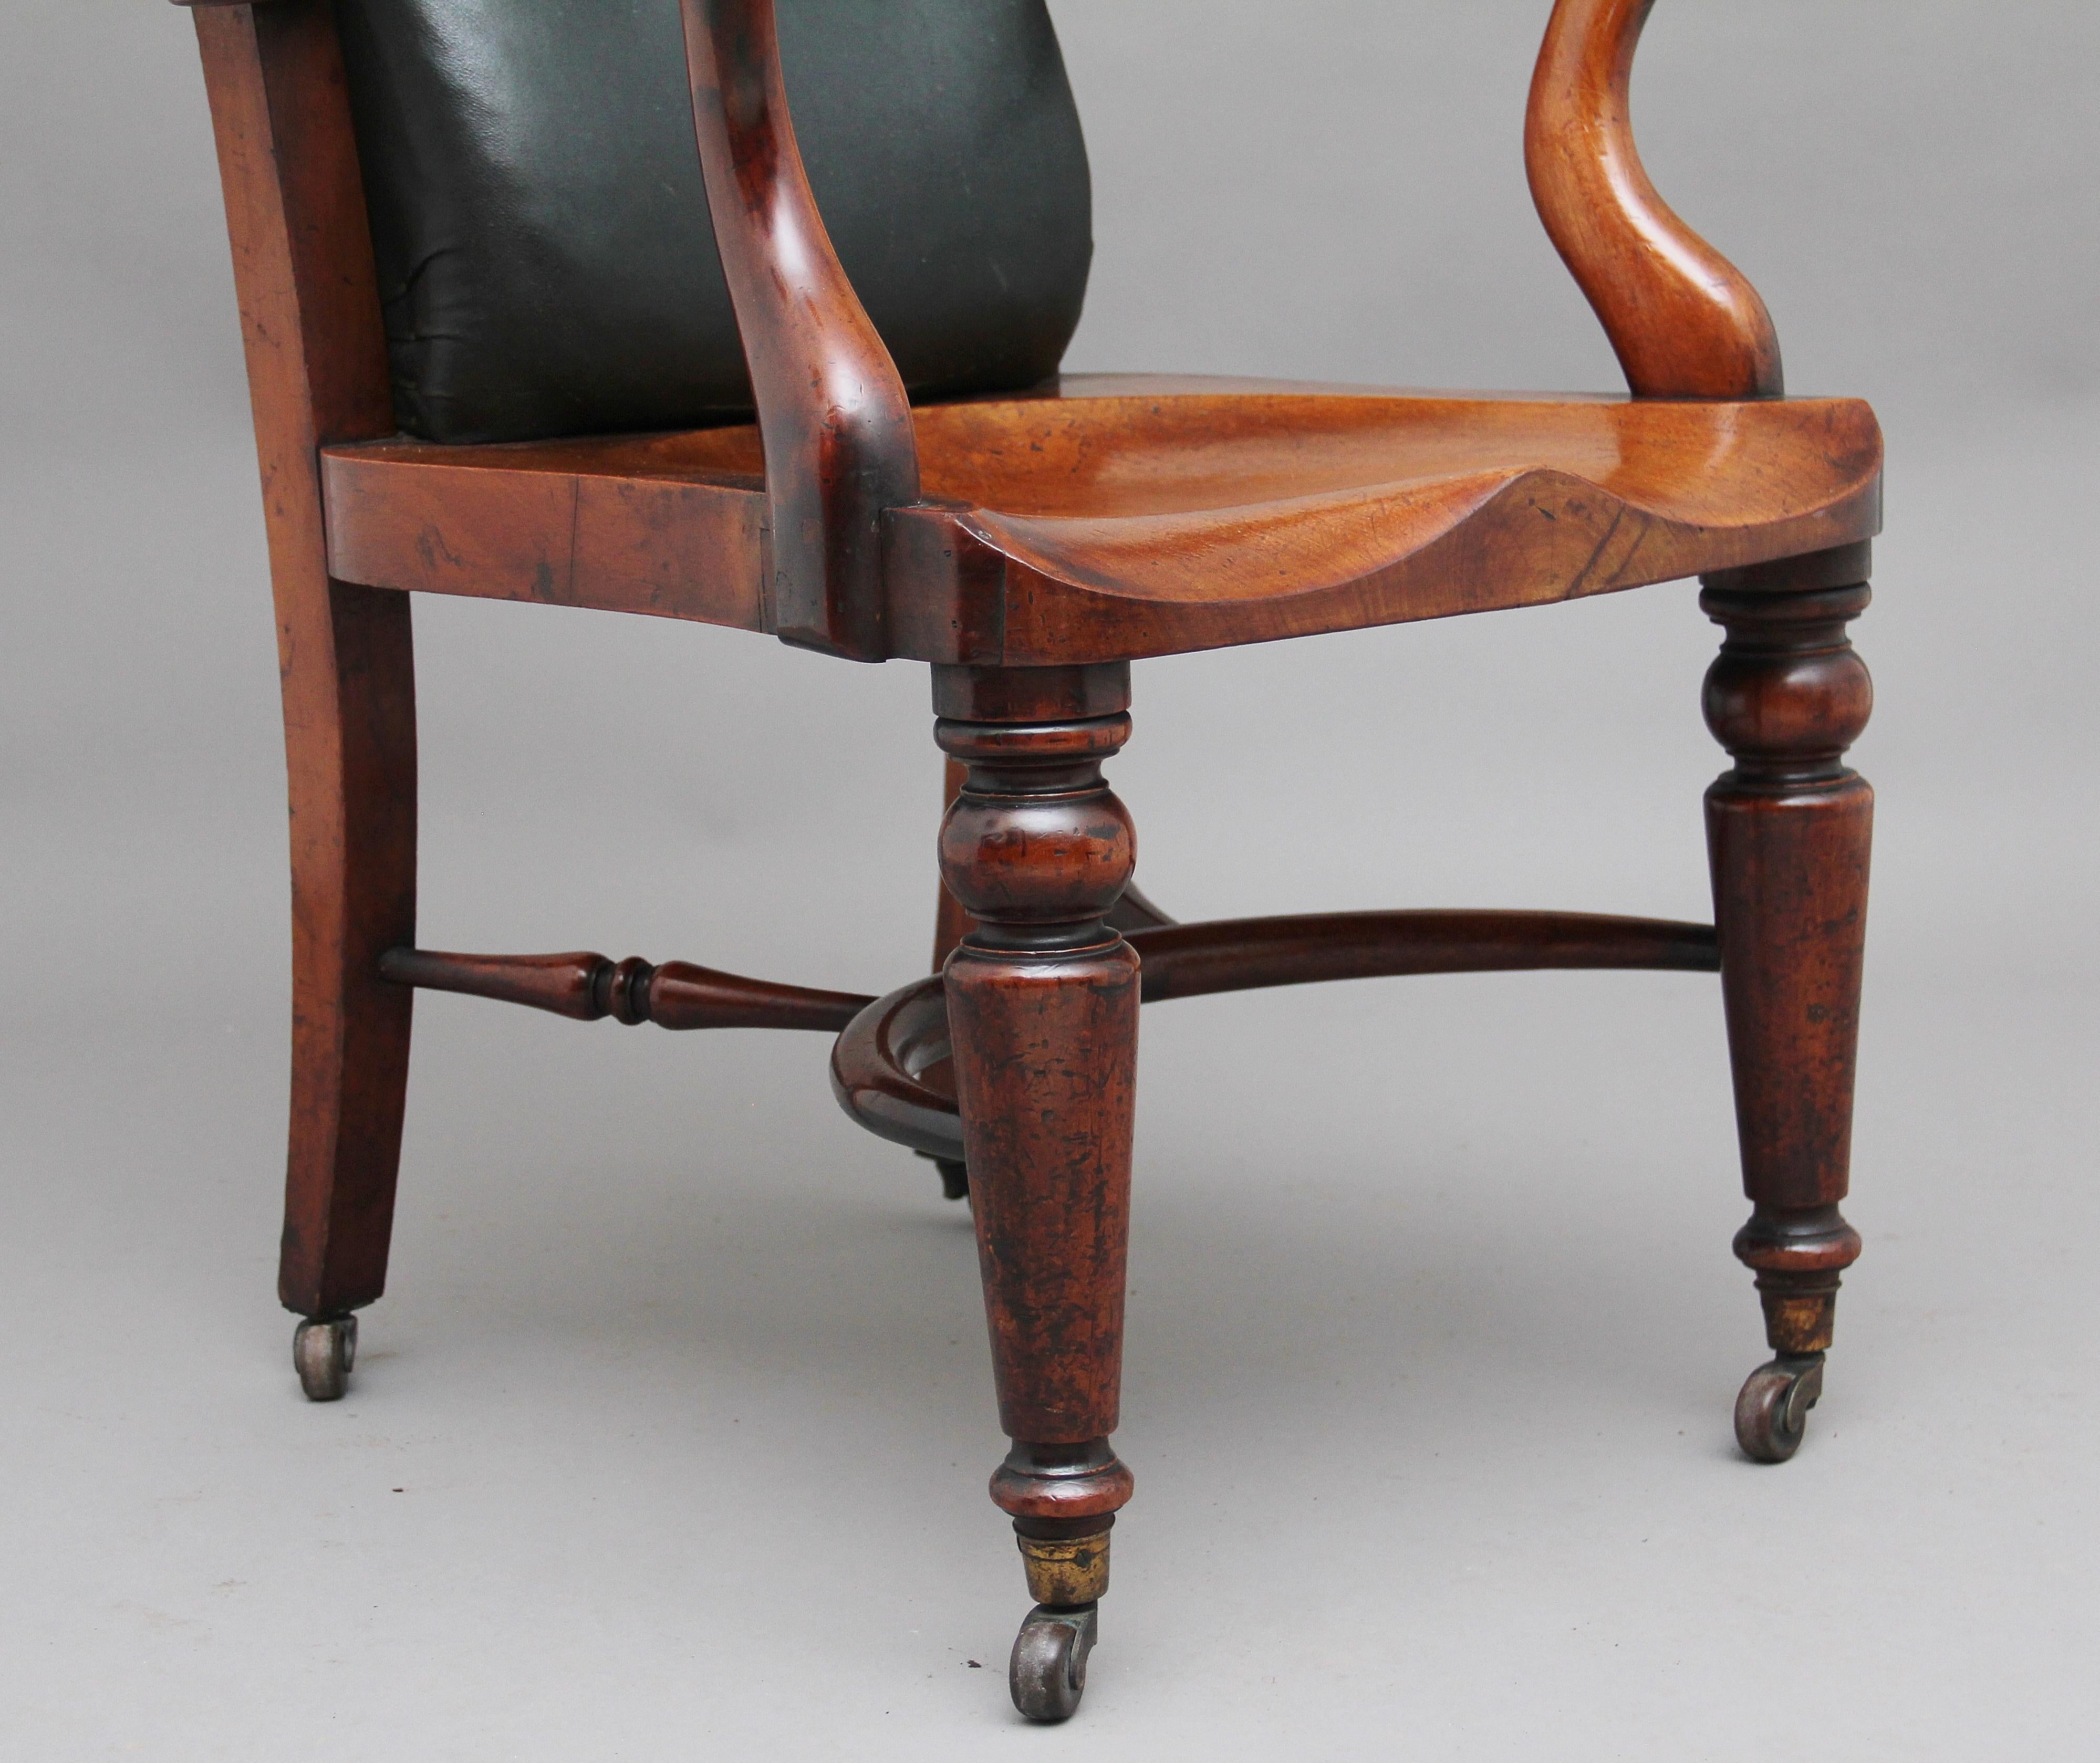 British 19th Century Heals of London Library Chair